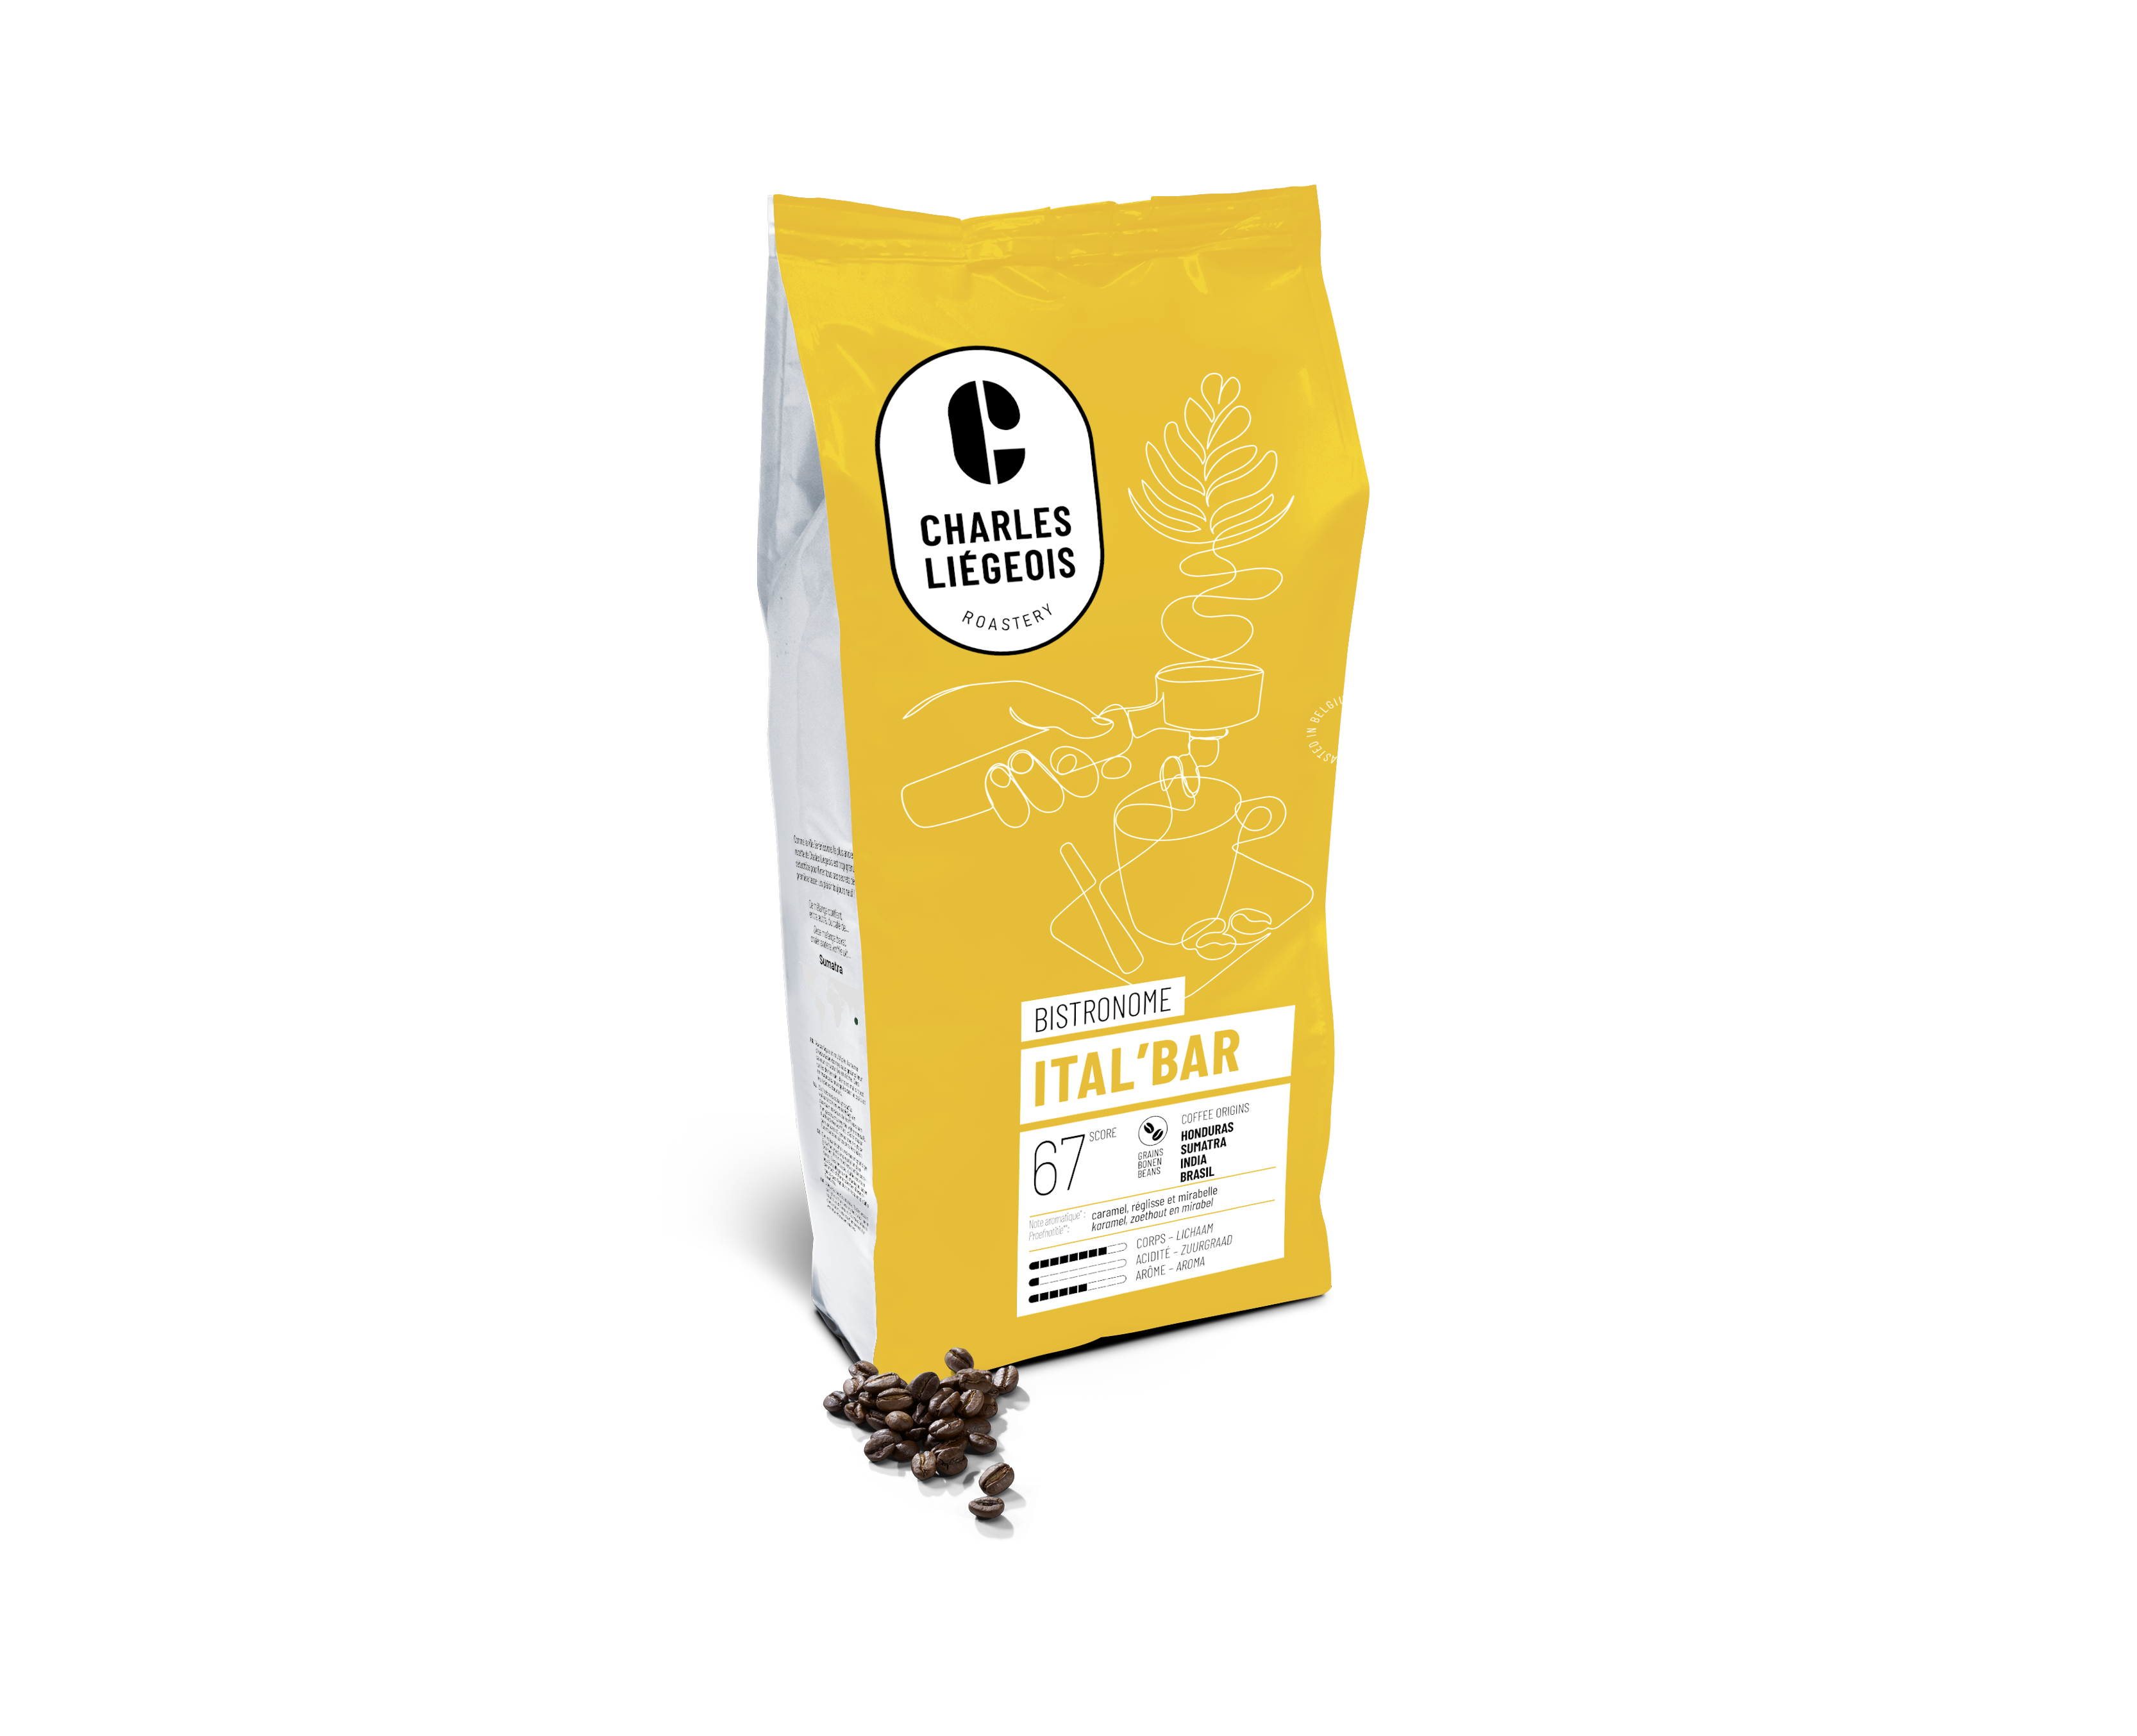 gamme Bistronome pack Ital'Bar Charles Liégeois Roastery